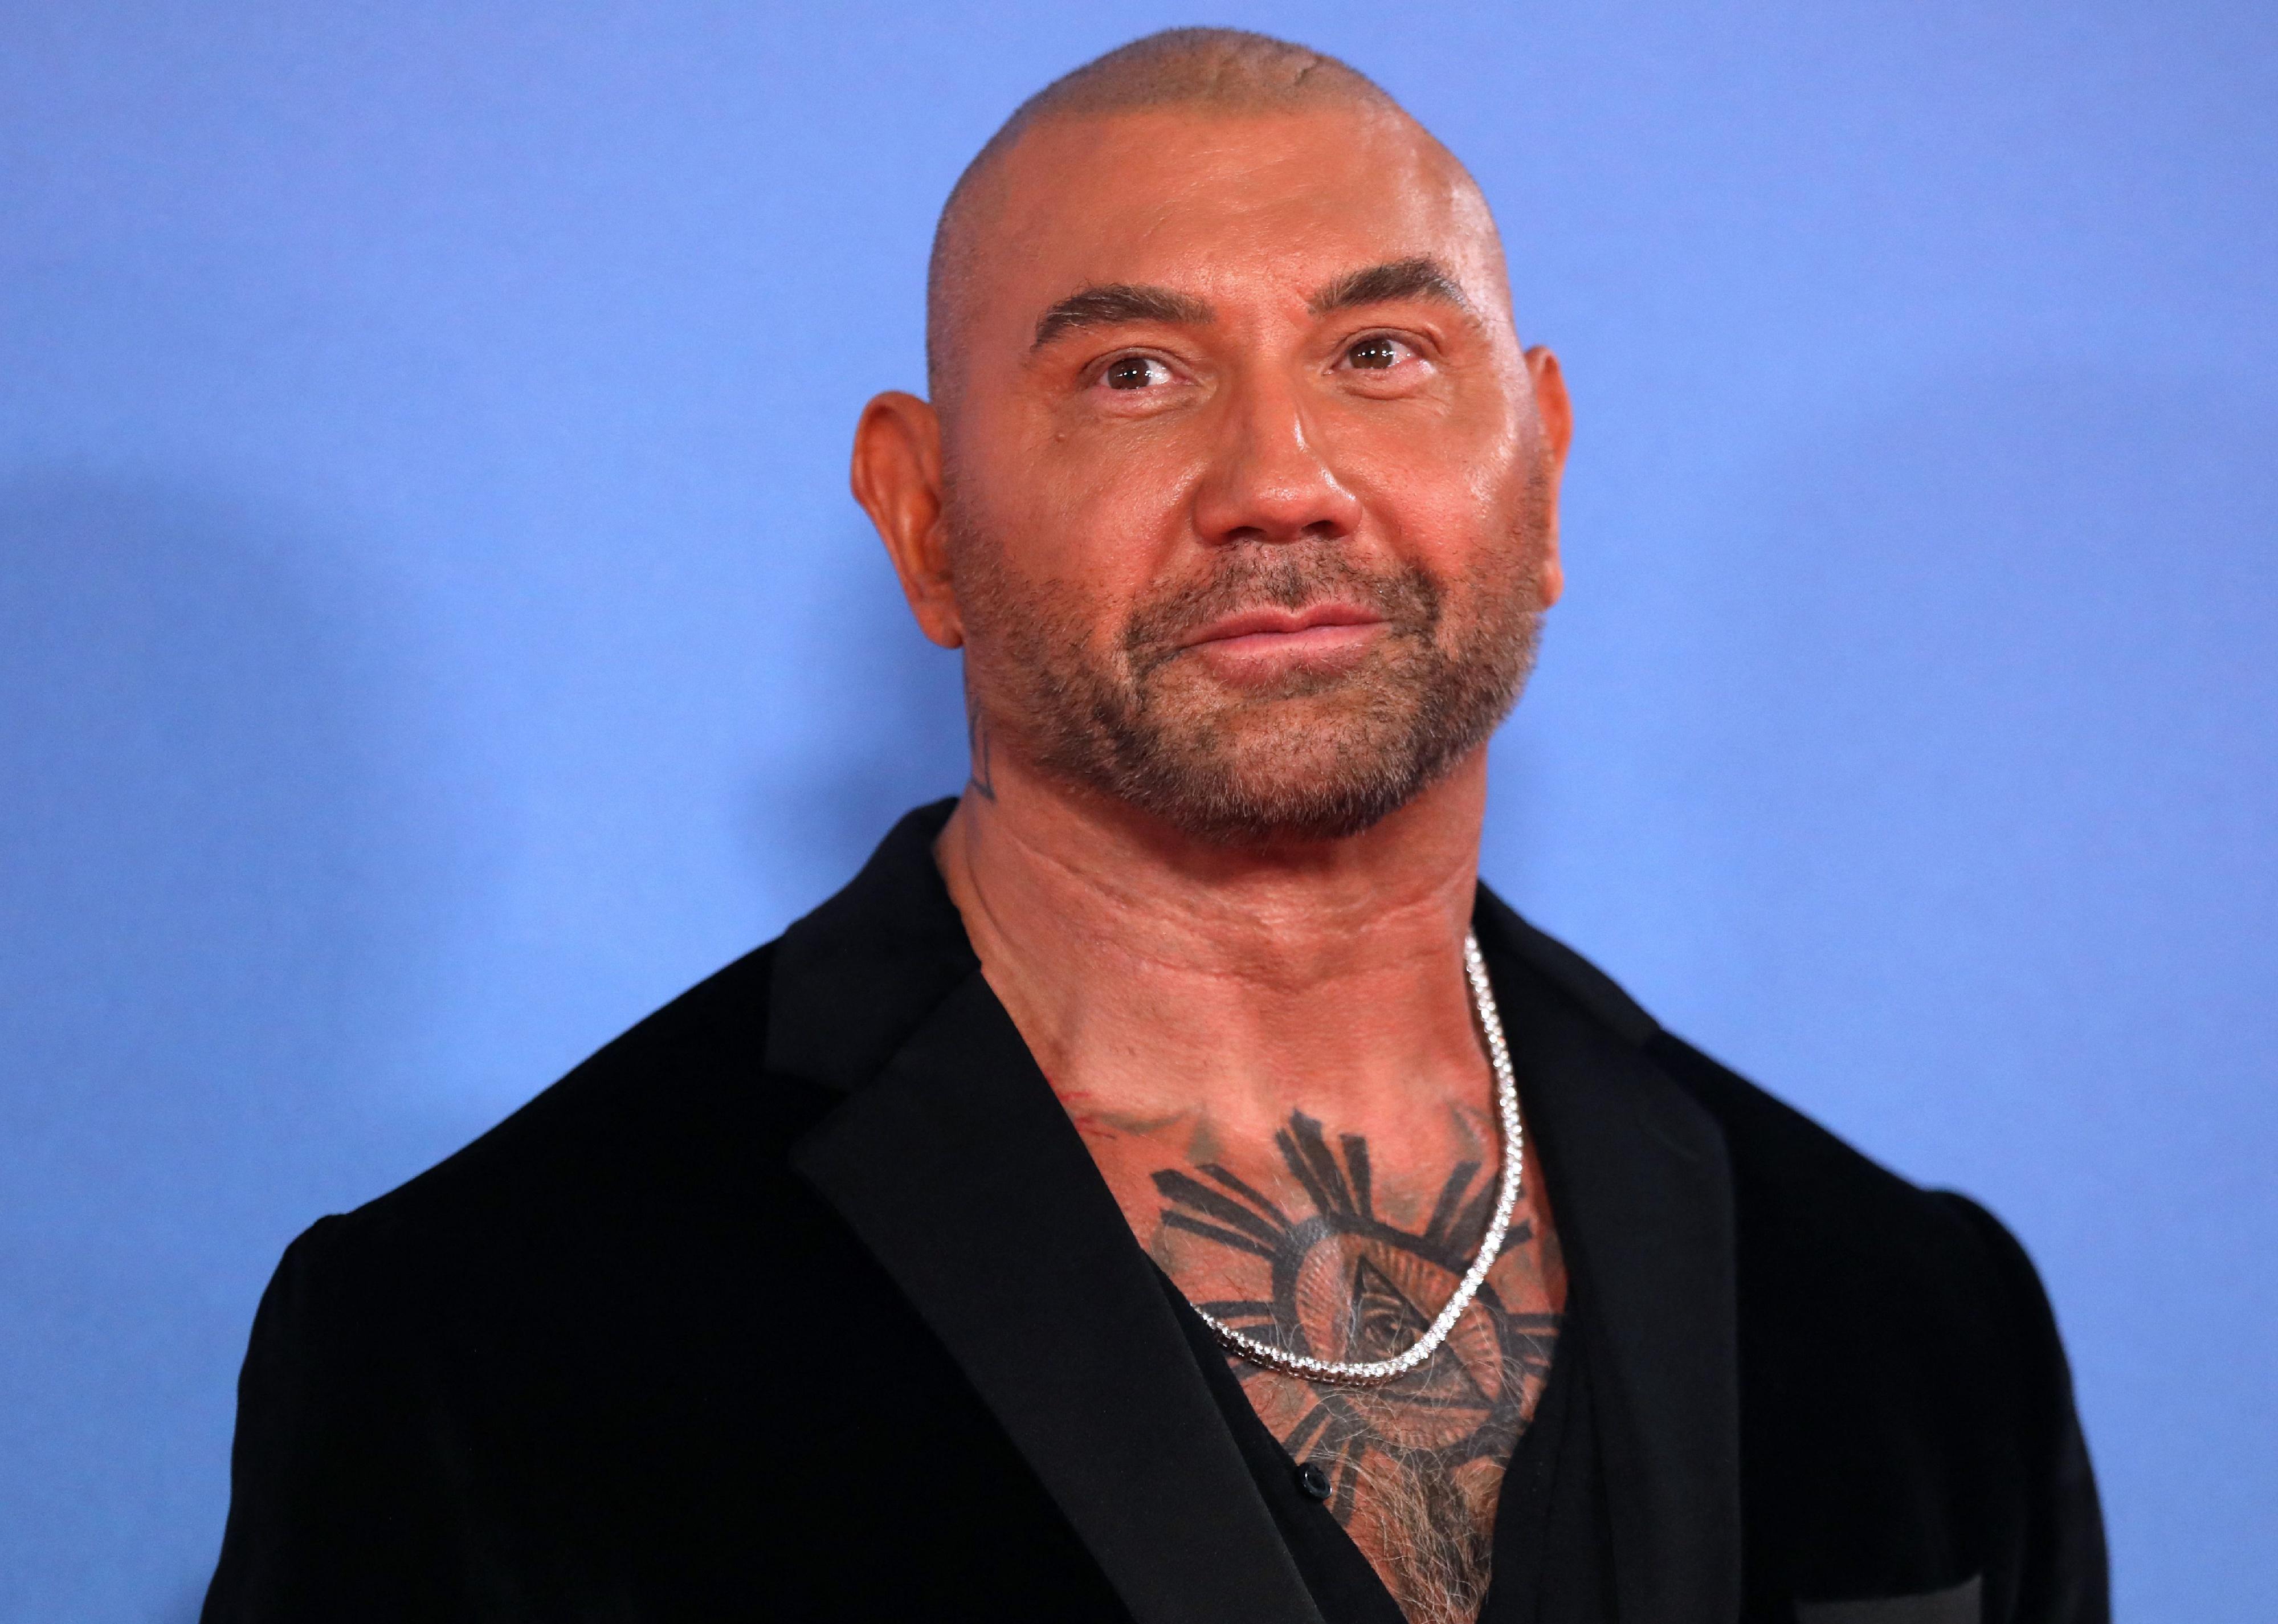 Dave Bautista in a black jacket against a blue background.